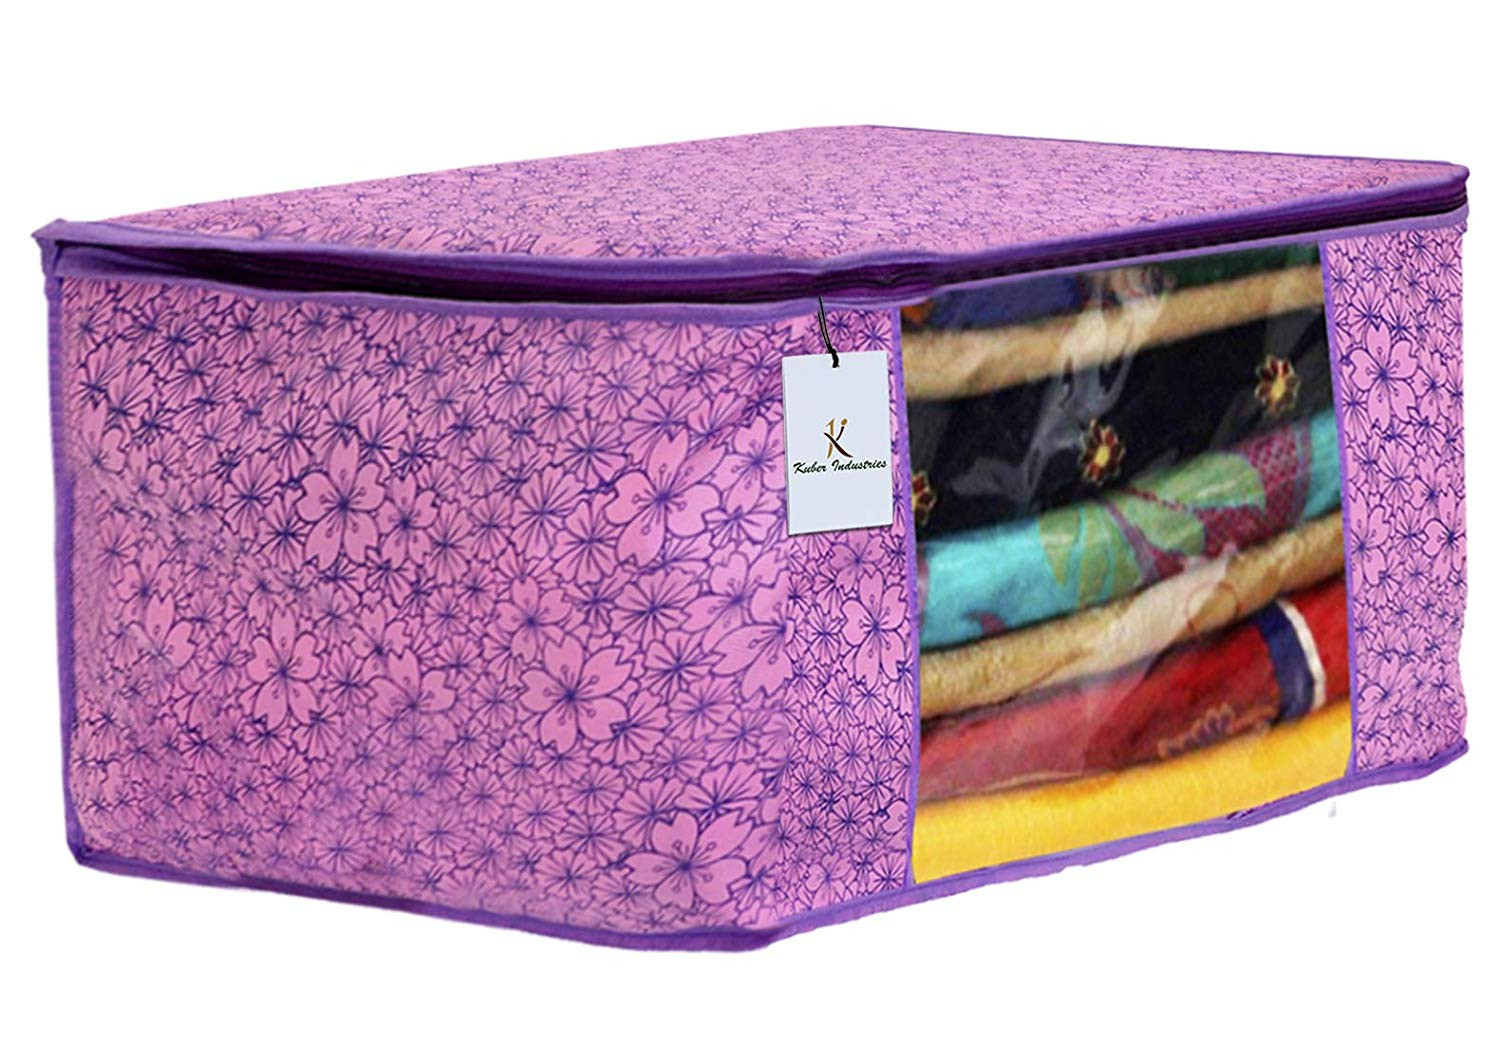 Kuber Industries Metalic Printed Non Woven Saree Cover And Underbed Storage Bag, Storage Organiser, Blanket Cover, Pink Purple & Ivory Red  -CTKTC42381